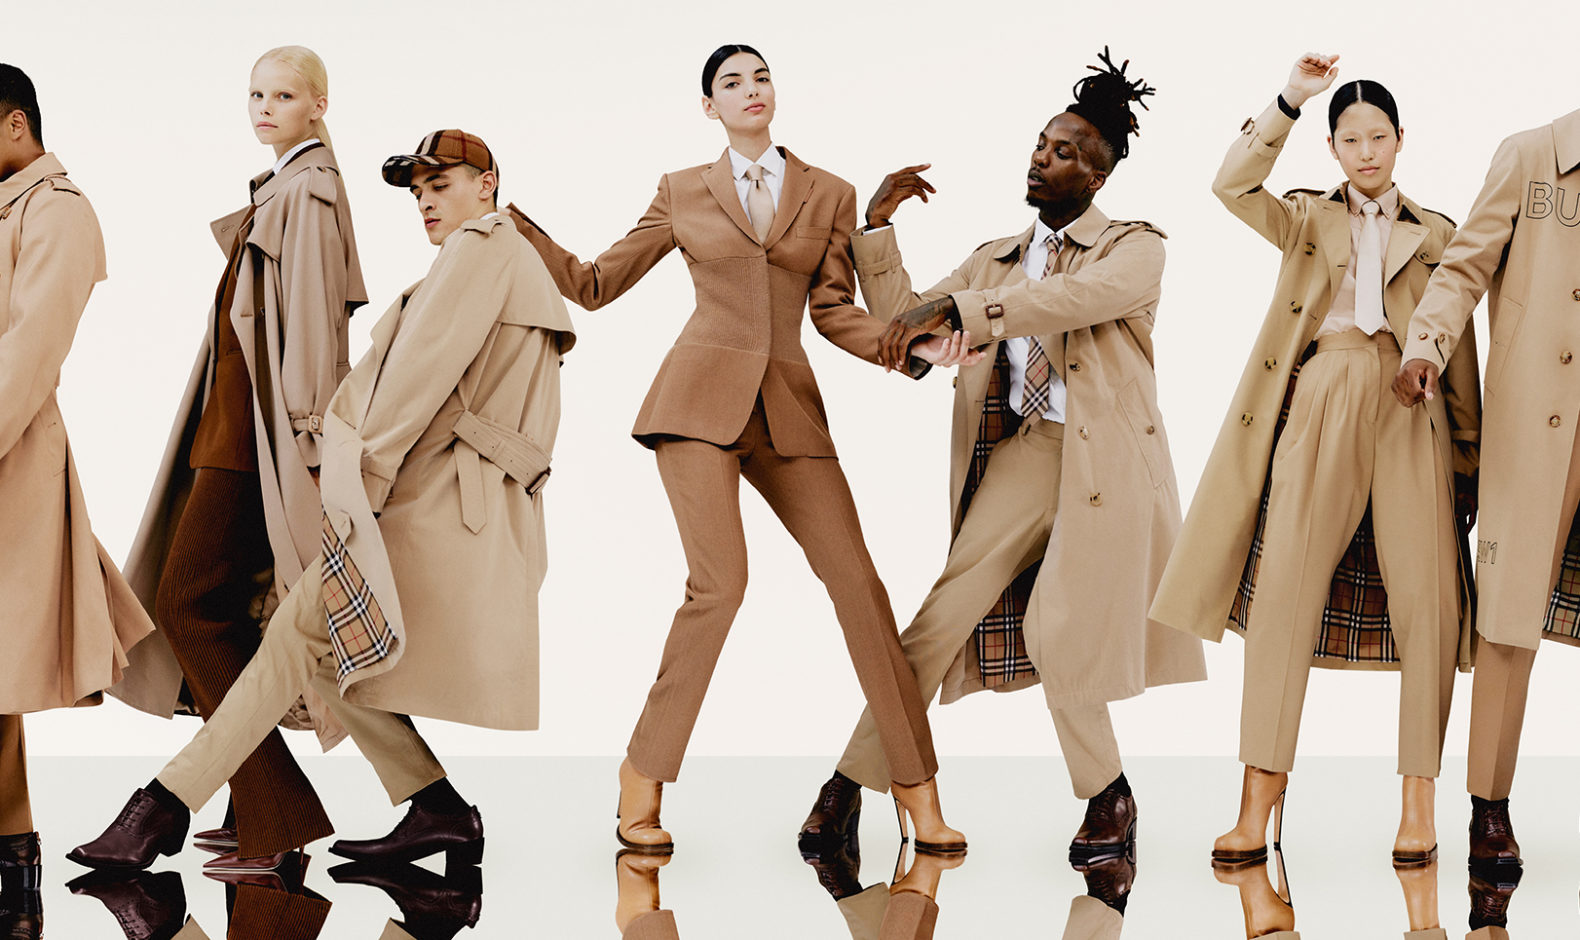 Burberry spring summer 2022 collection the marriage of sensuality and youthful, mischievous spirit